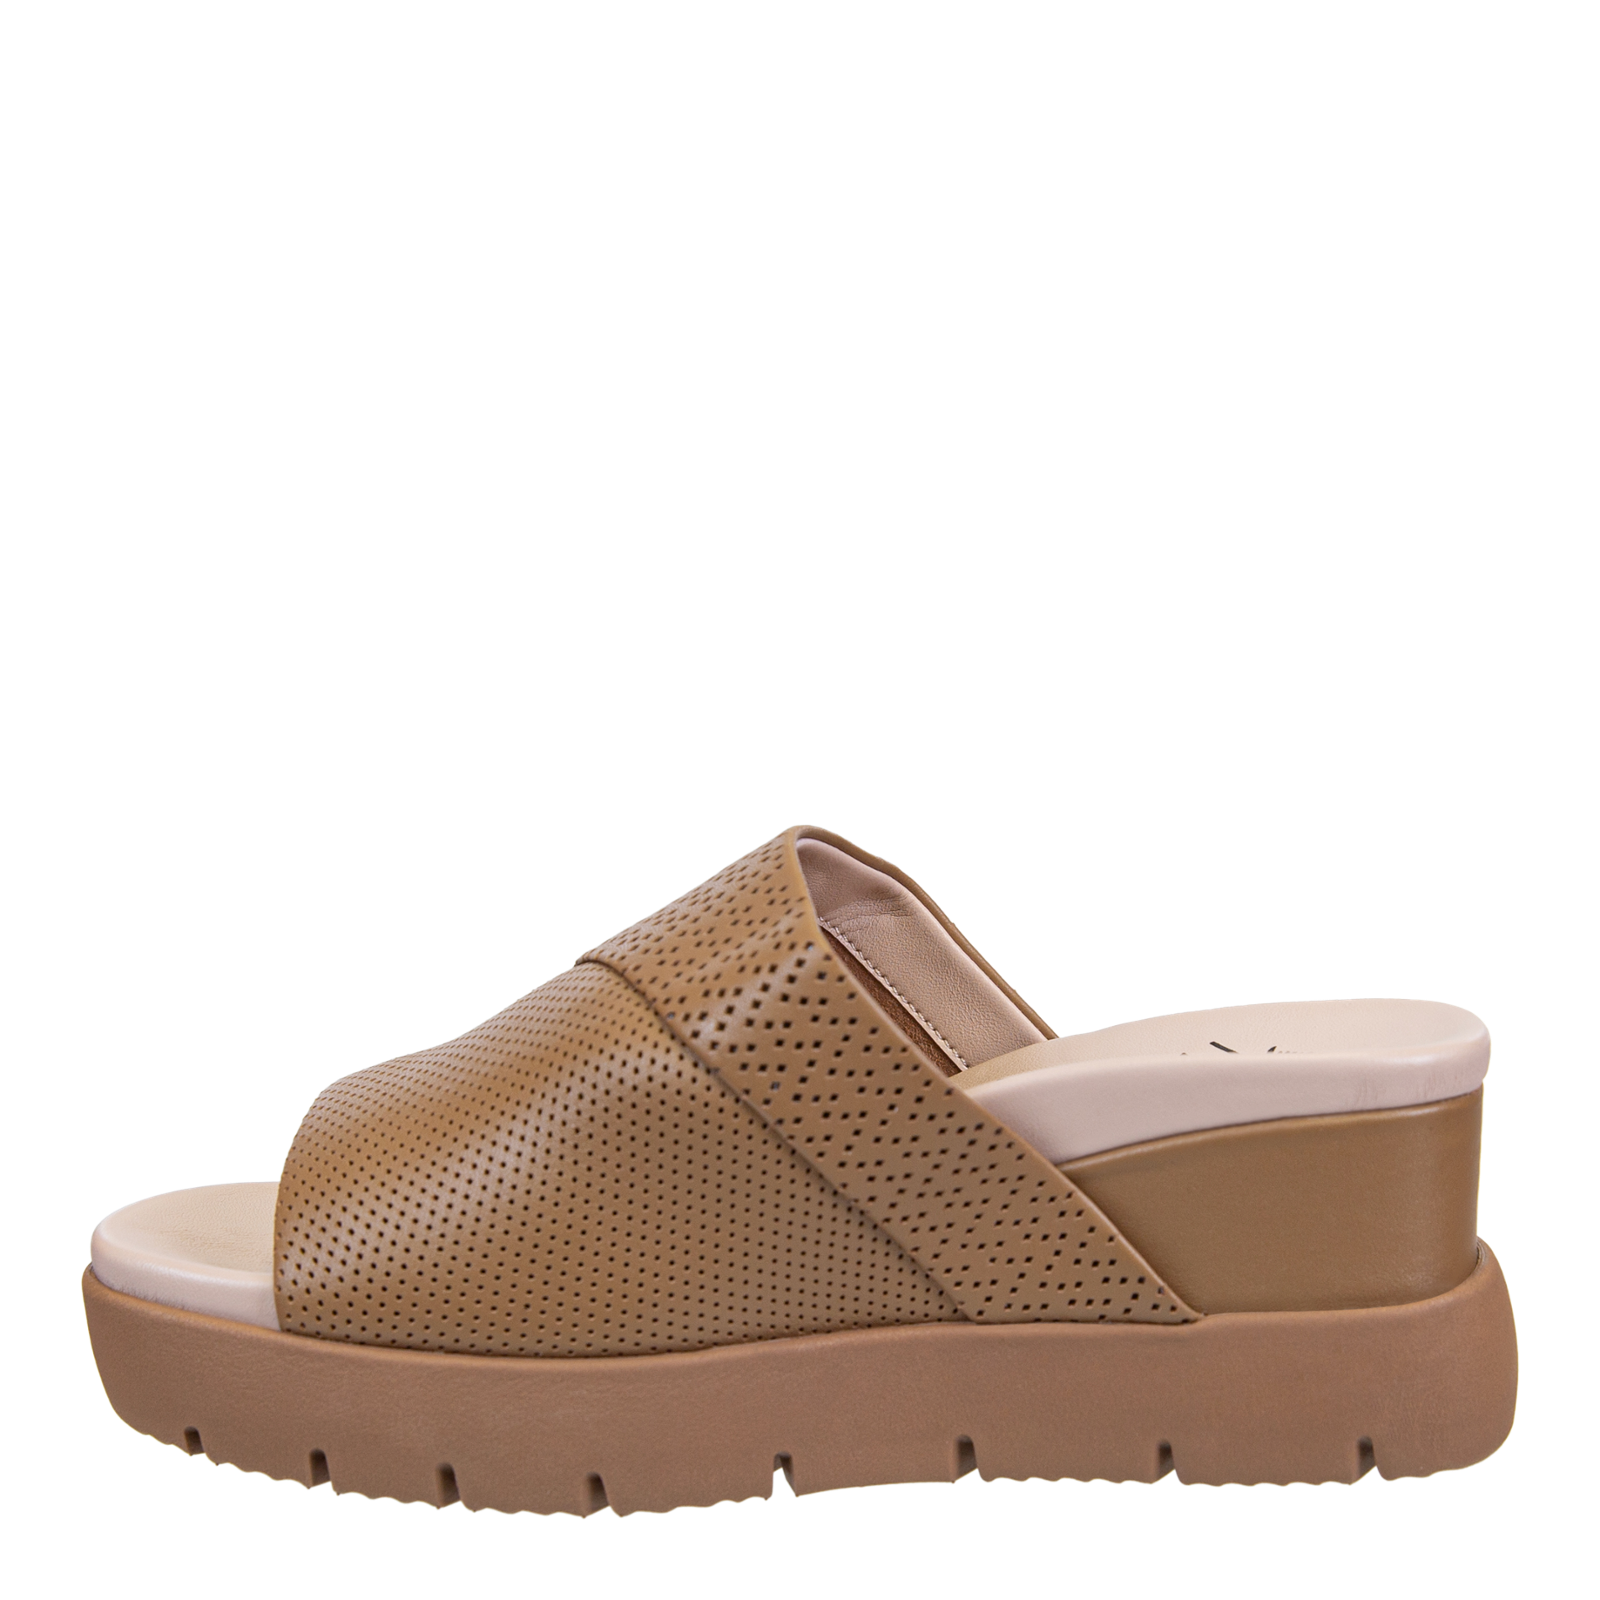 OTBT - NORM in BROWN Wedge Sandals